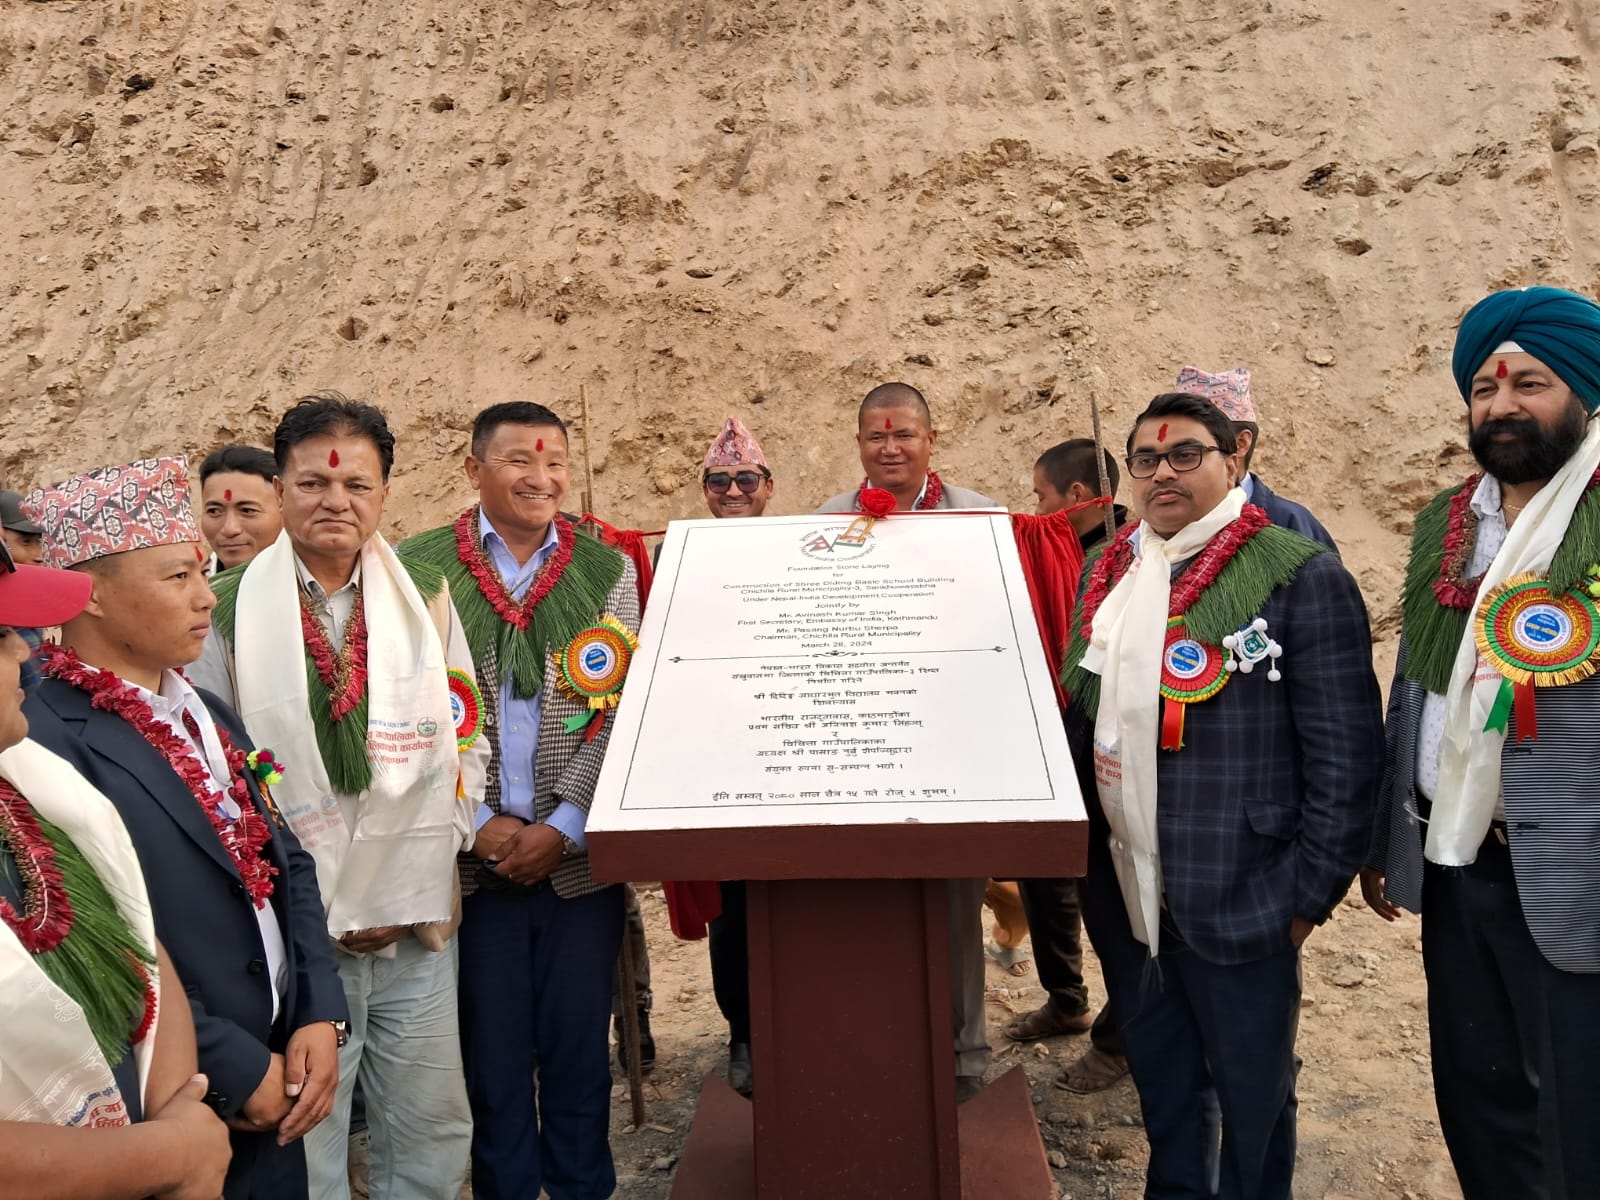 Foundation stone laid for the construction of school building with Indian assistance in Sankhuwasabha district